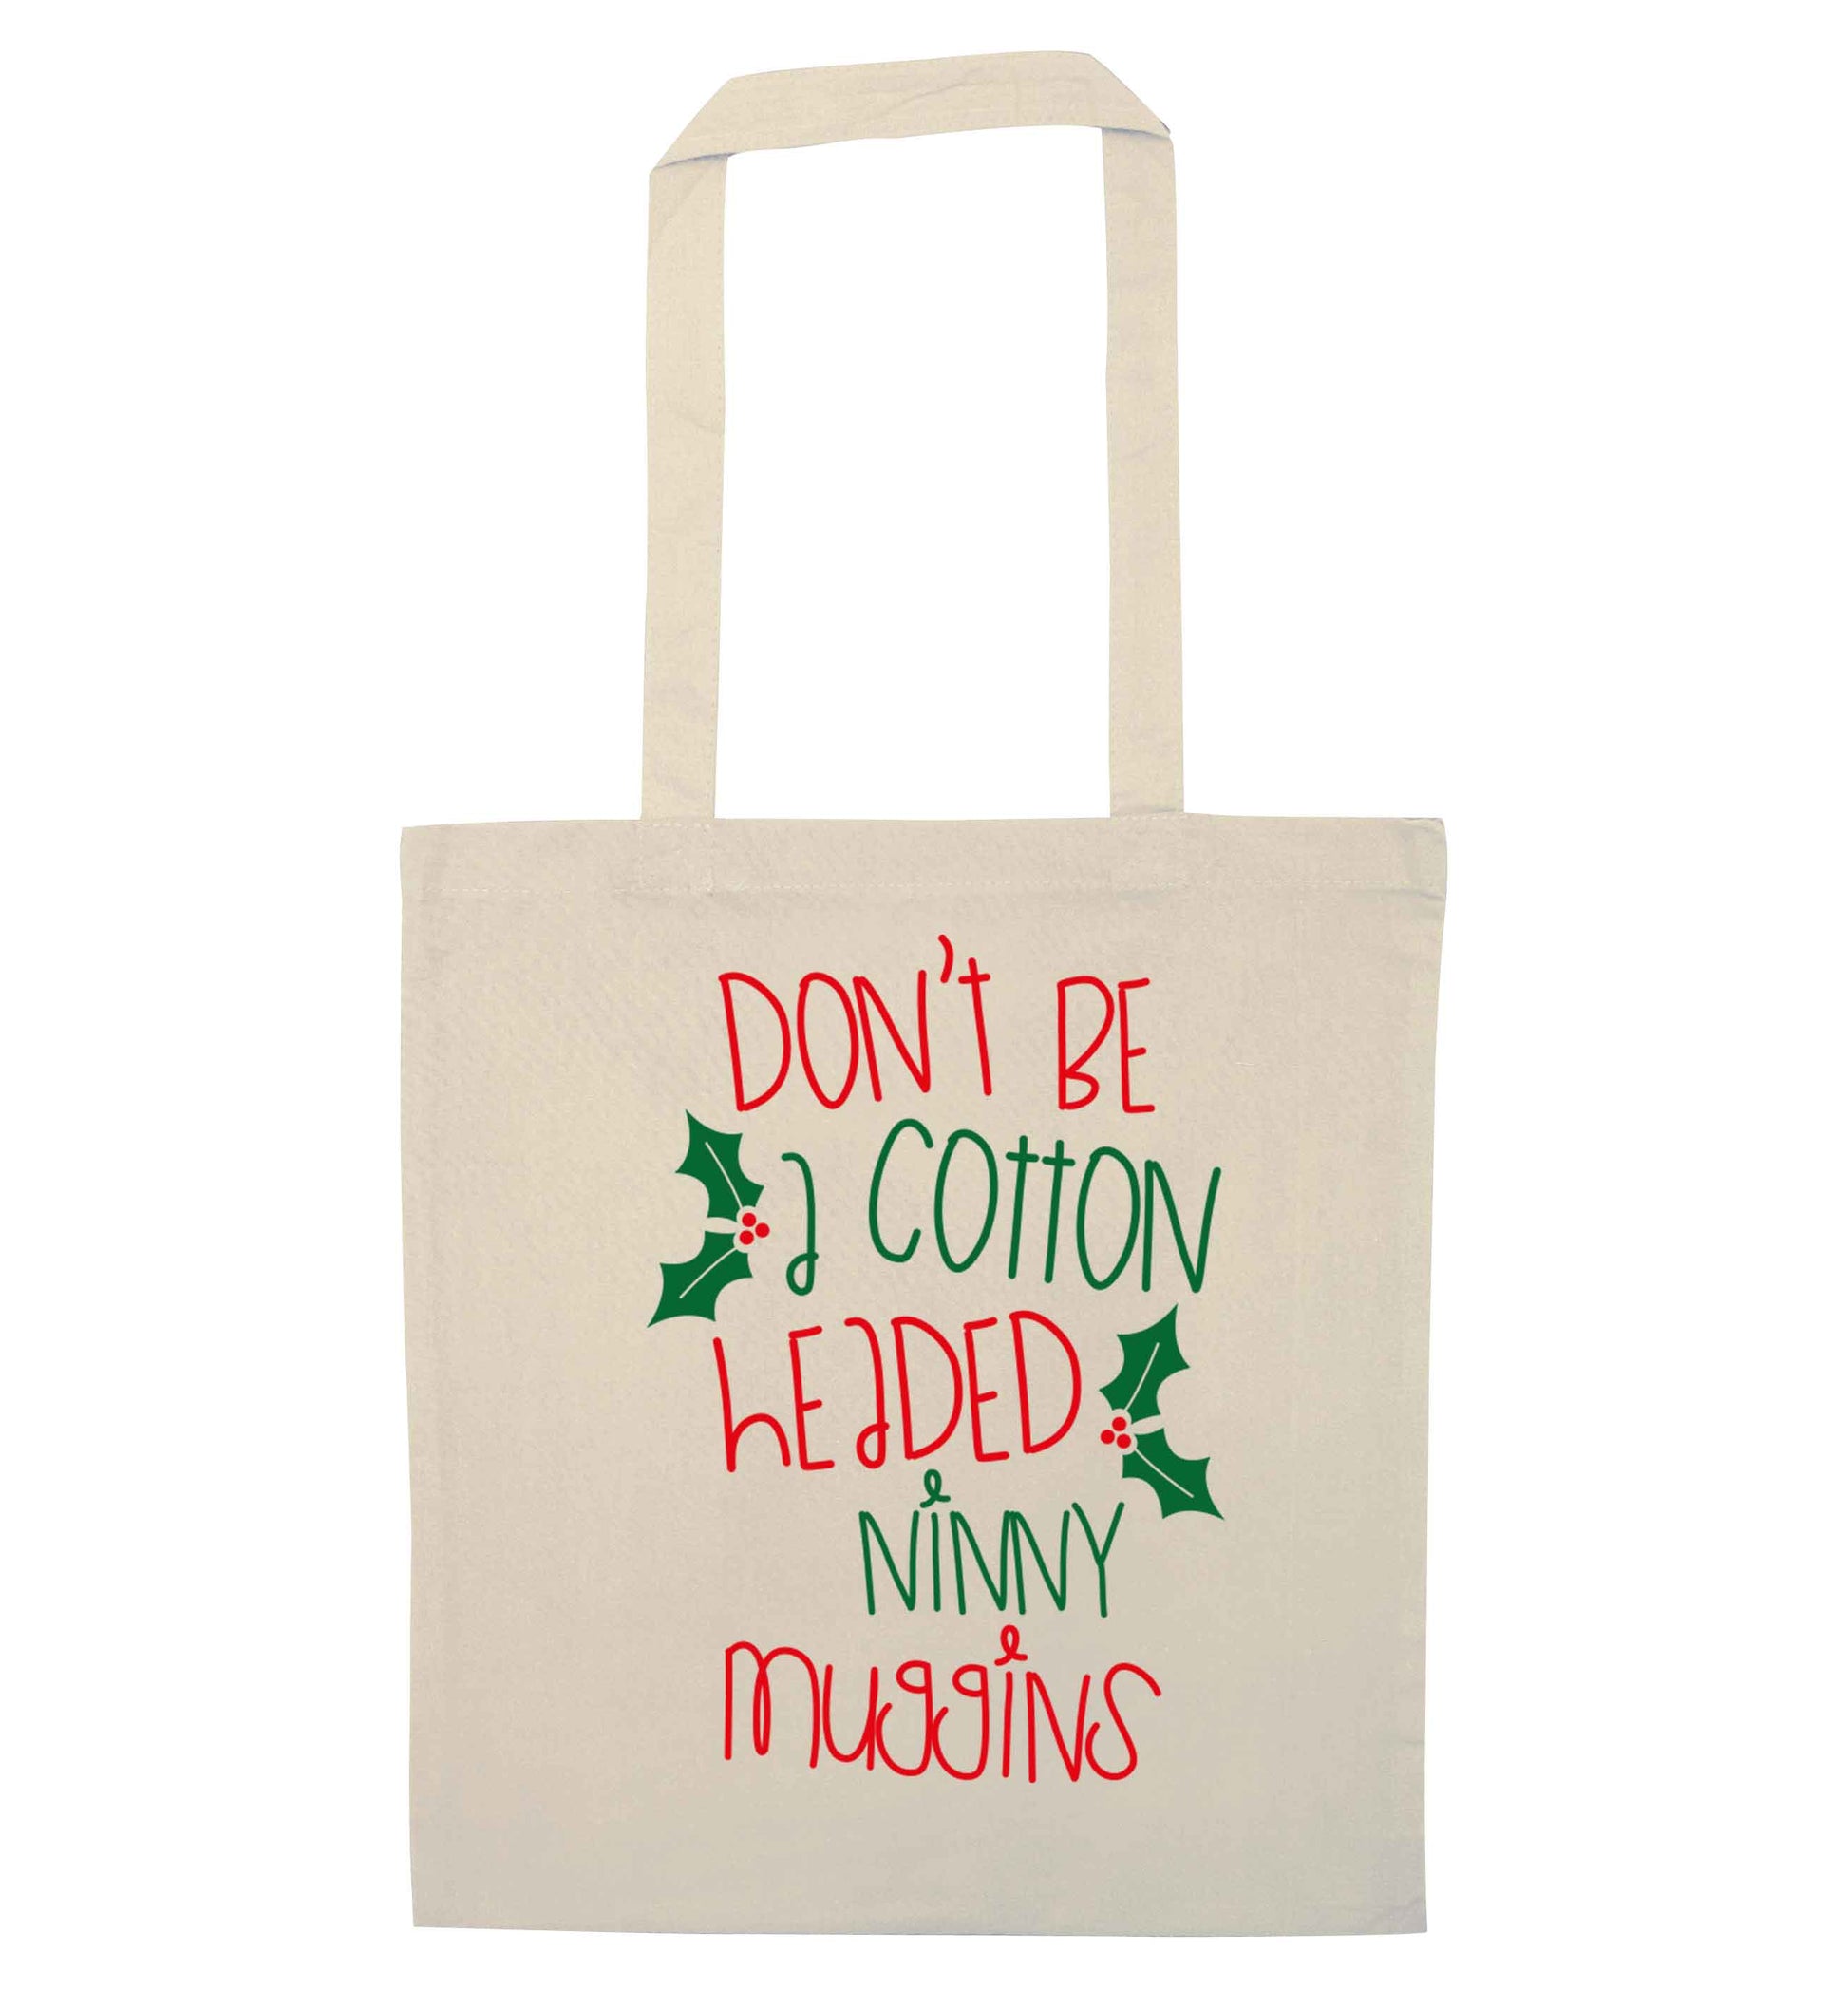 Too Late to be Good natural tote bag